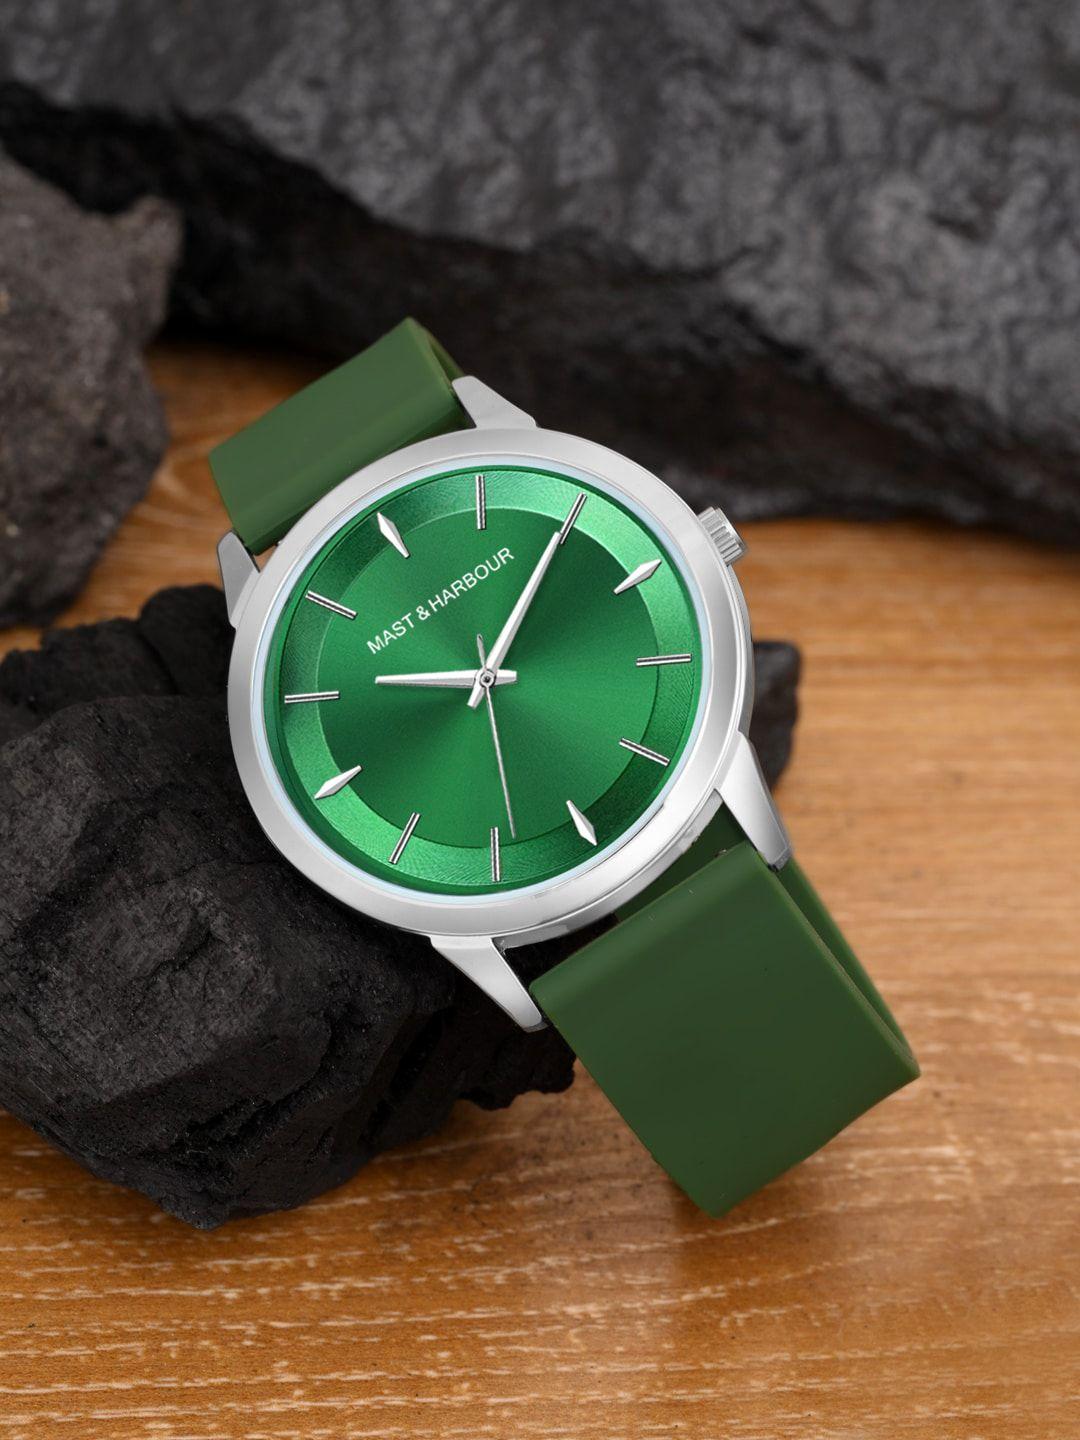 mast-&-harbour-green-men-reset-time-analogue-watch-hobmh-238-gr